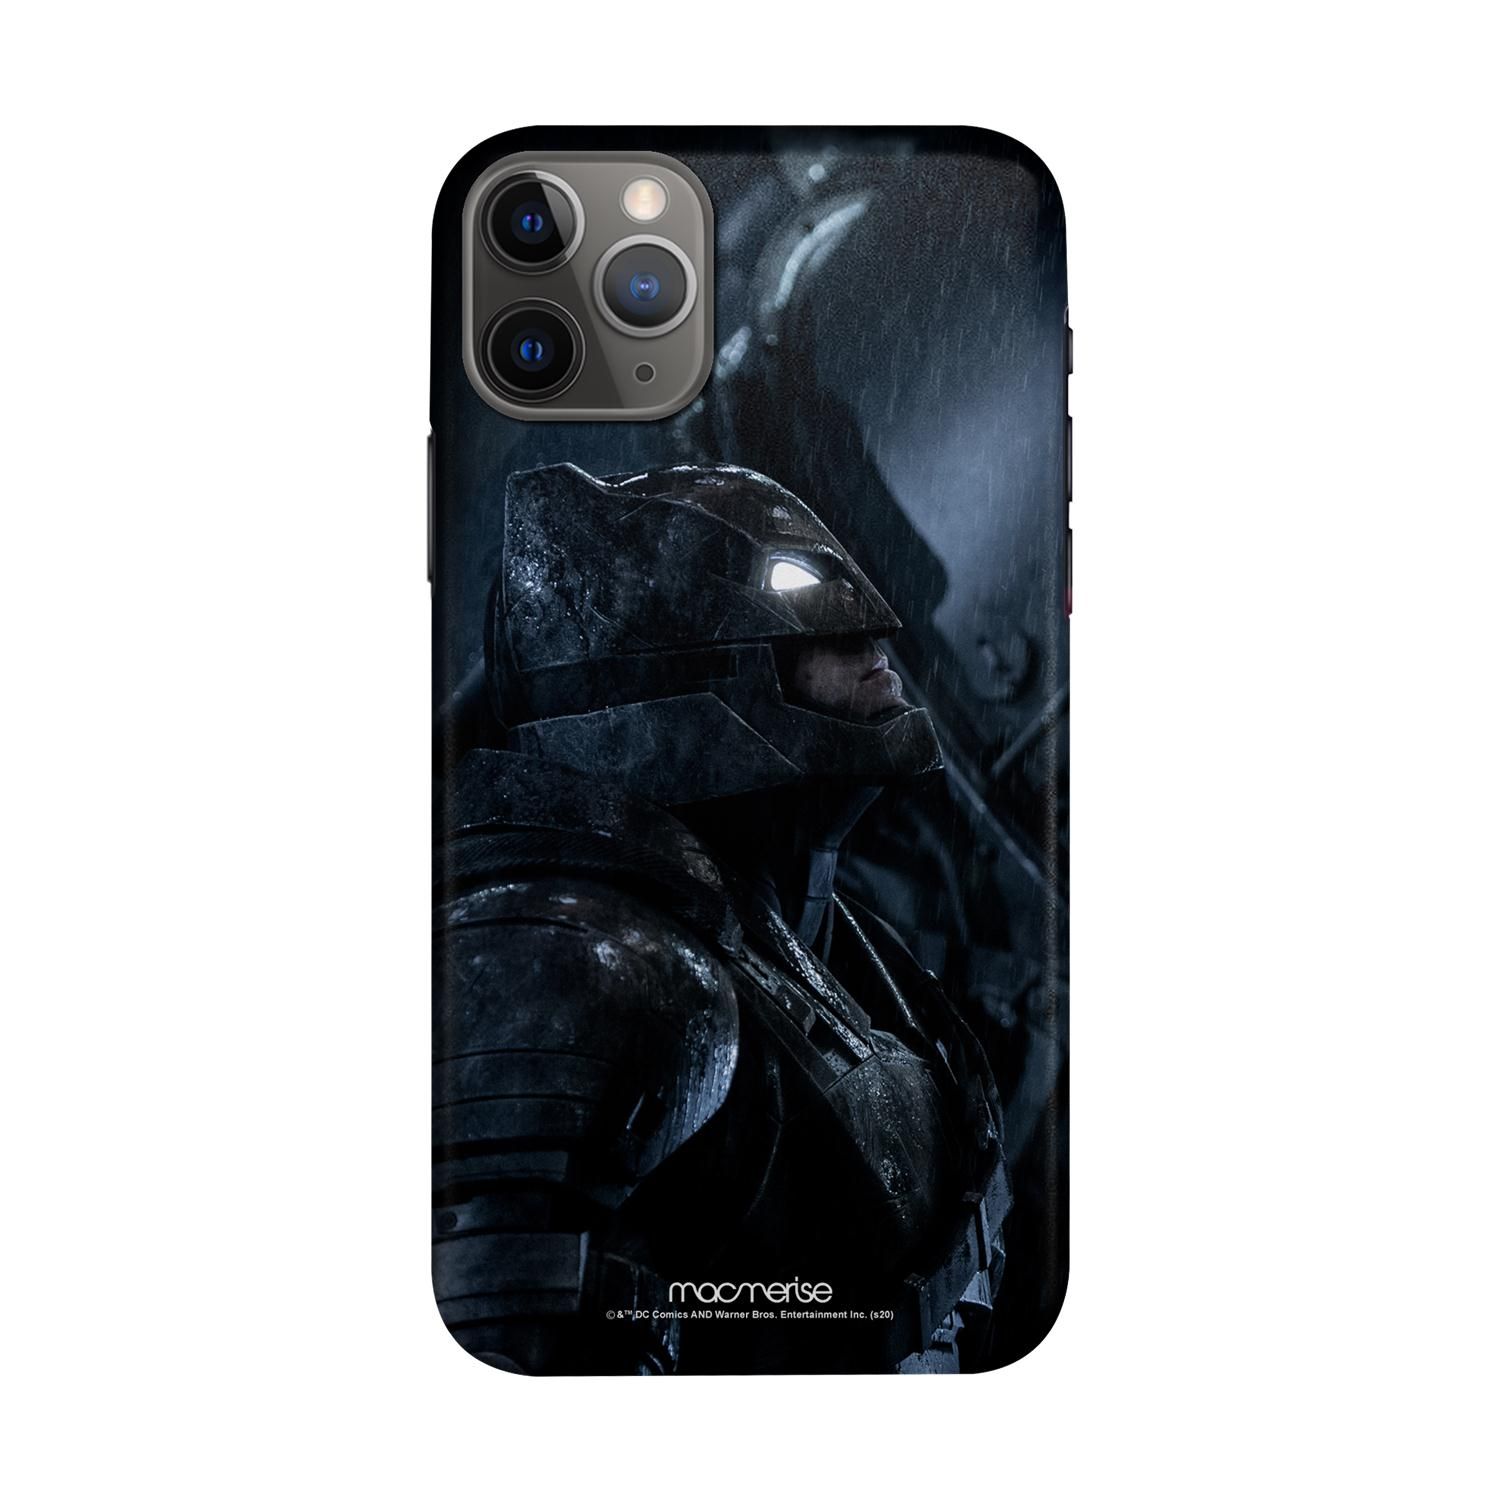 Buy The Victory Glance - Sleek Phone Case for iPhone 11 Pro Online